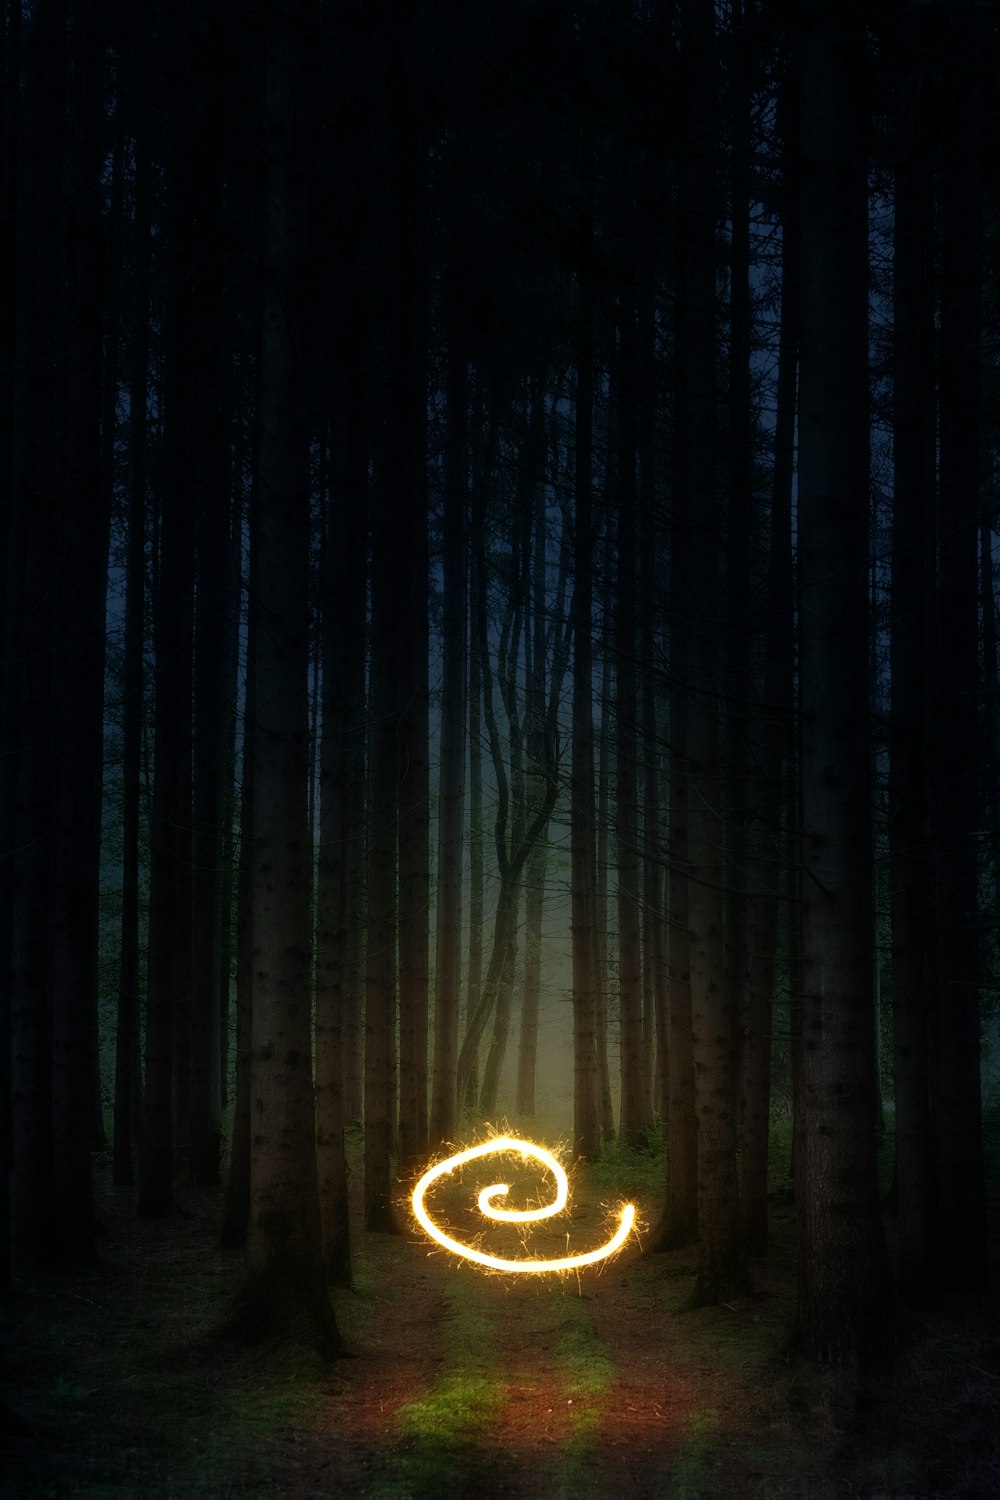 heart shaped light in the middle of forest